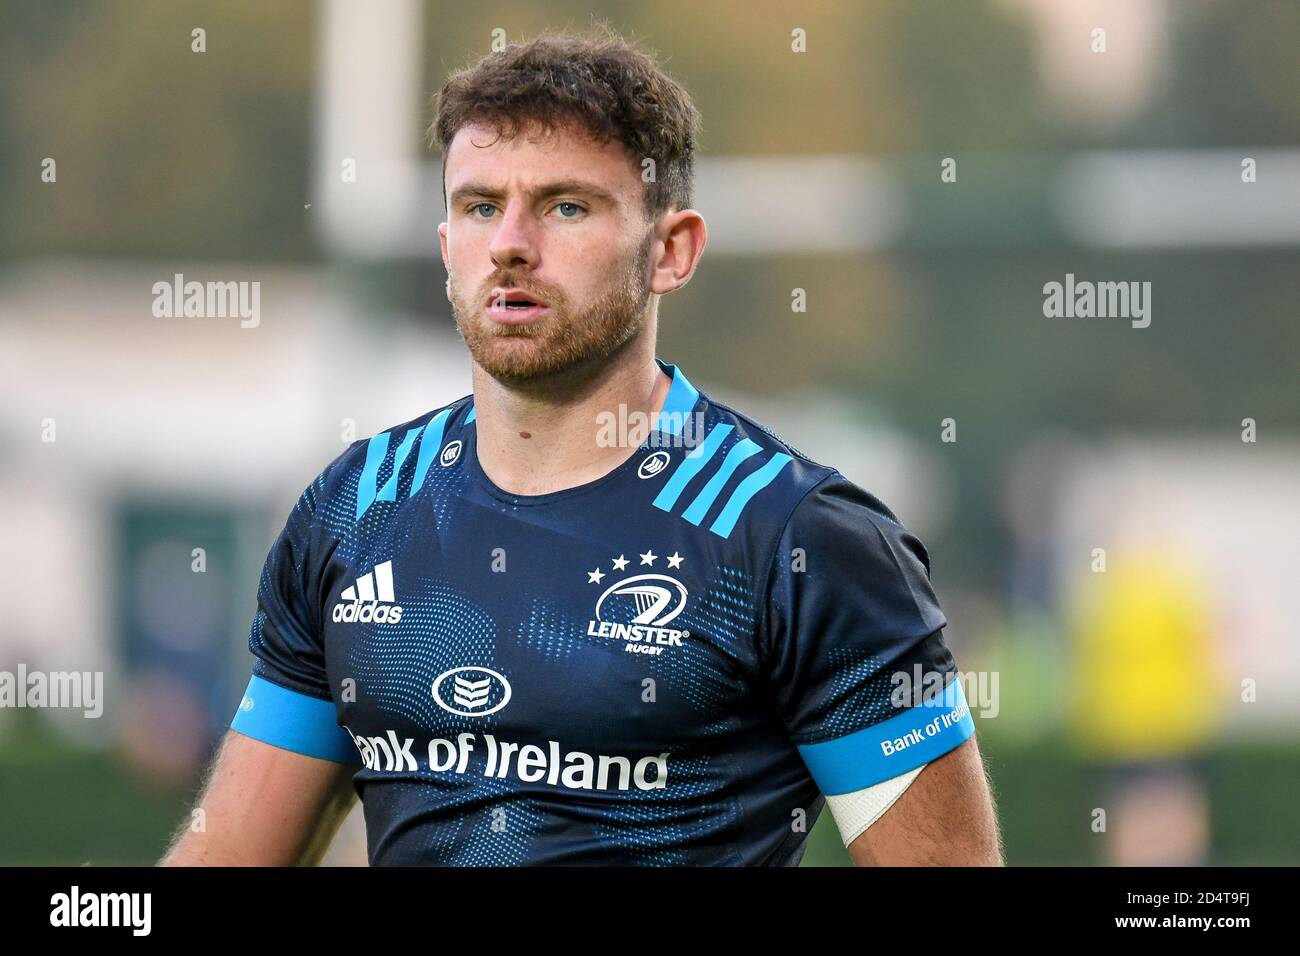 ugo Keenan (Leinster) during Benetton Treviso vs Leinster Rugby, Rugby  Guinness Pro 14, Treviso, Italy, 10 Oct 2020 Credit: LM/Ettore Griffoni  Stock Photo - Alamy